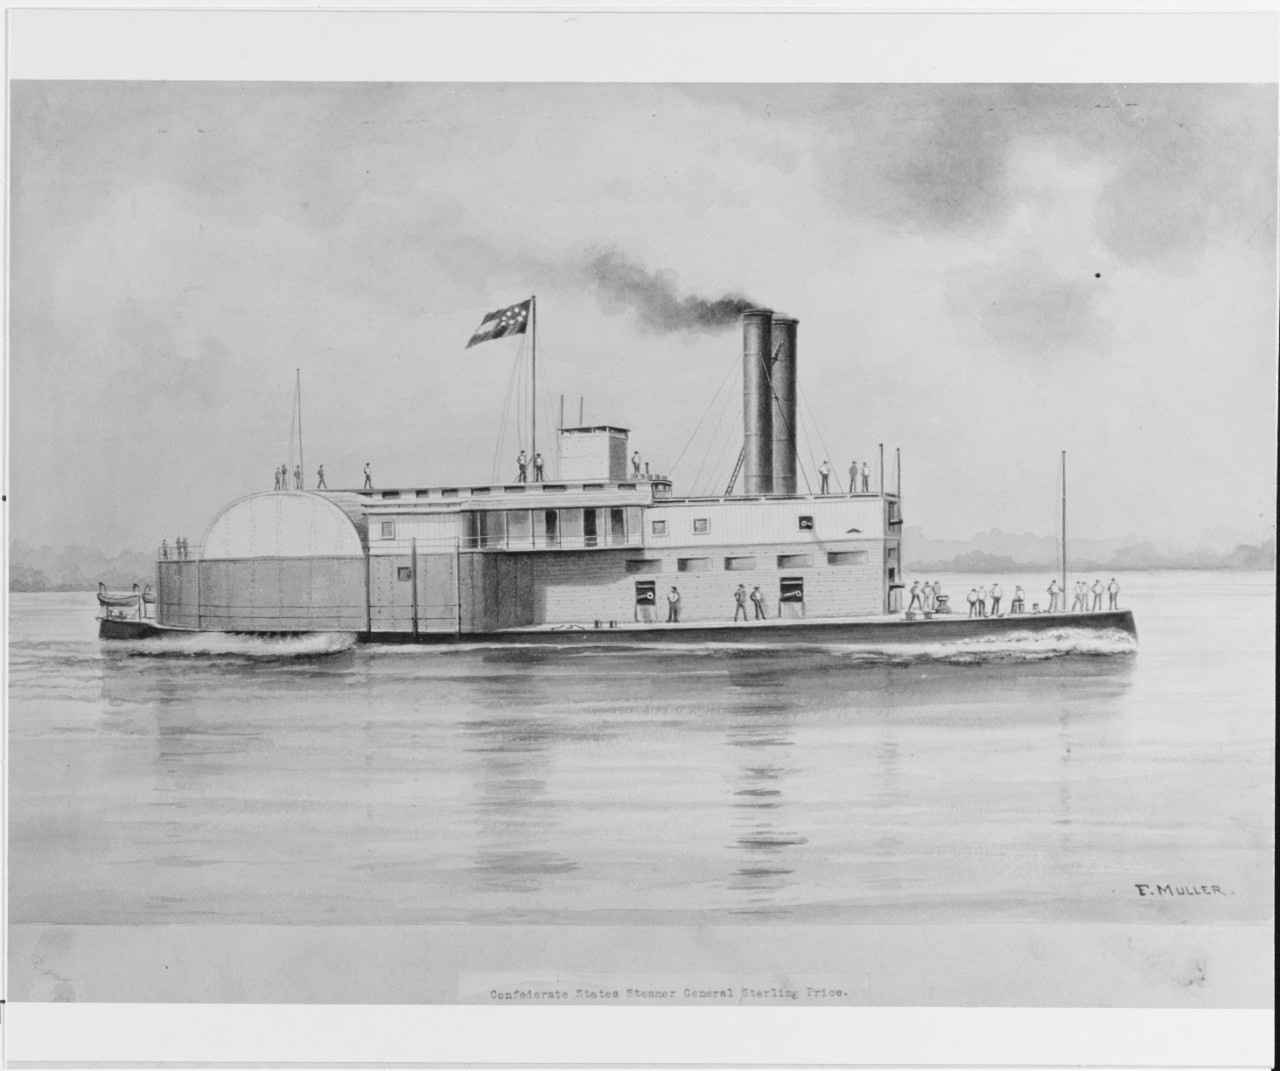 Photo #: NH 55834 One of the Ellet Rams (under false colors!) Sepia wash drawing by F. Muller, circa 1900. This painting, based on Photo # NH 53868, suffers from that photograph's original incorrect identification. Intended by the artist to depict the Confederate ram steamer General Sterling Price, and featuring the Confederate flag, it instead represents one of the U.S. ram steamers of the Ellet fleet. Only one of the Ellet Rams, Queen of the West, saw Confederate service, and she did not look like the ship depicted here.